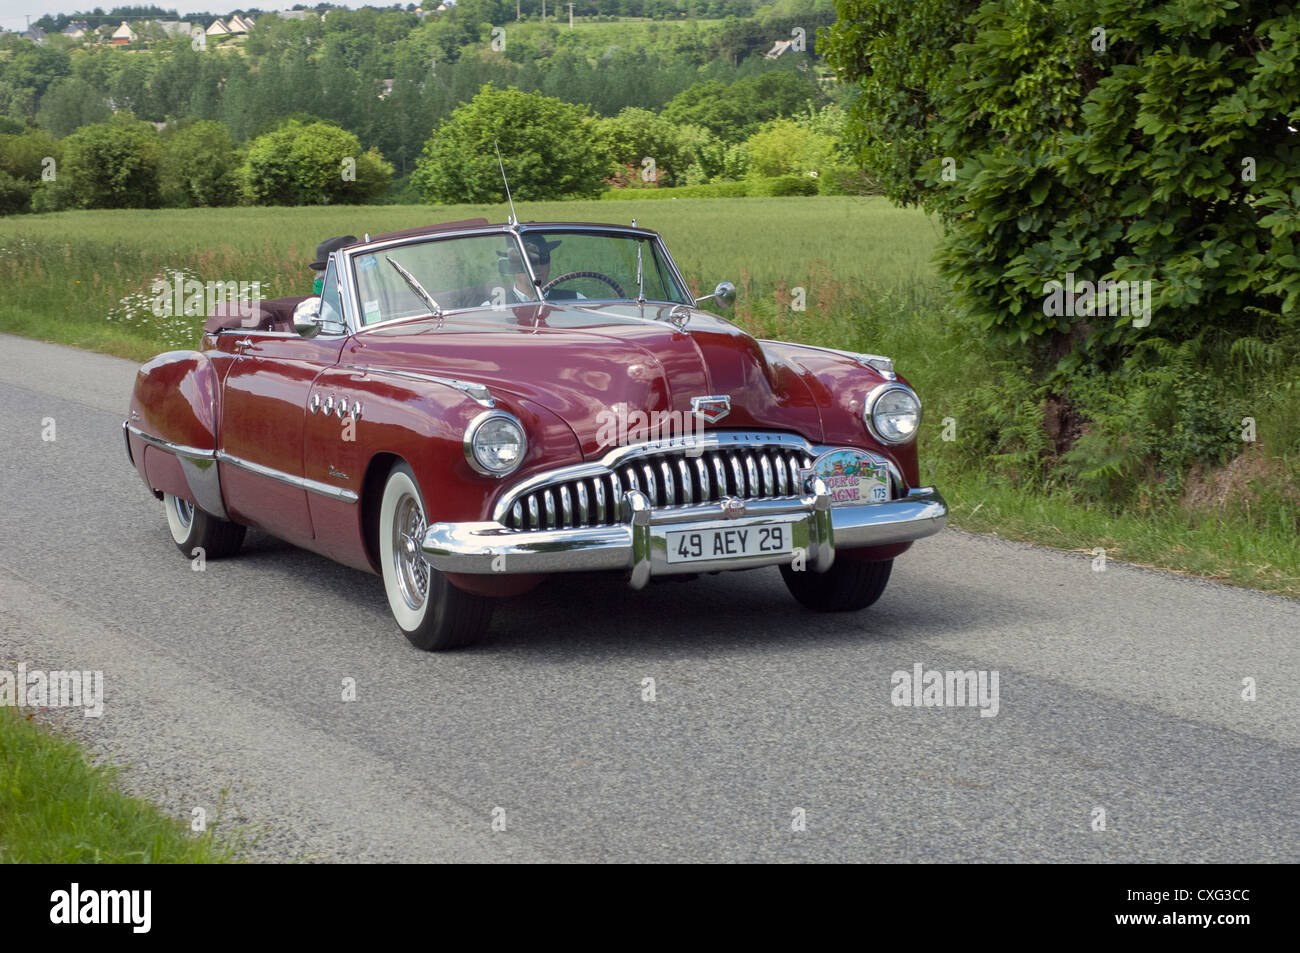 Buick Roadmaster Convertible cabriolet of 1949 in the Tour de Bretagne, France, 2012 Stock Photo